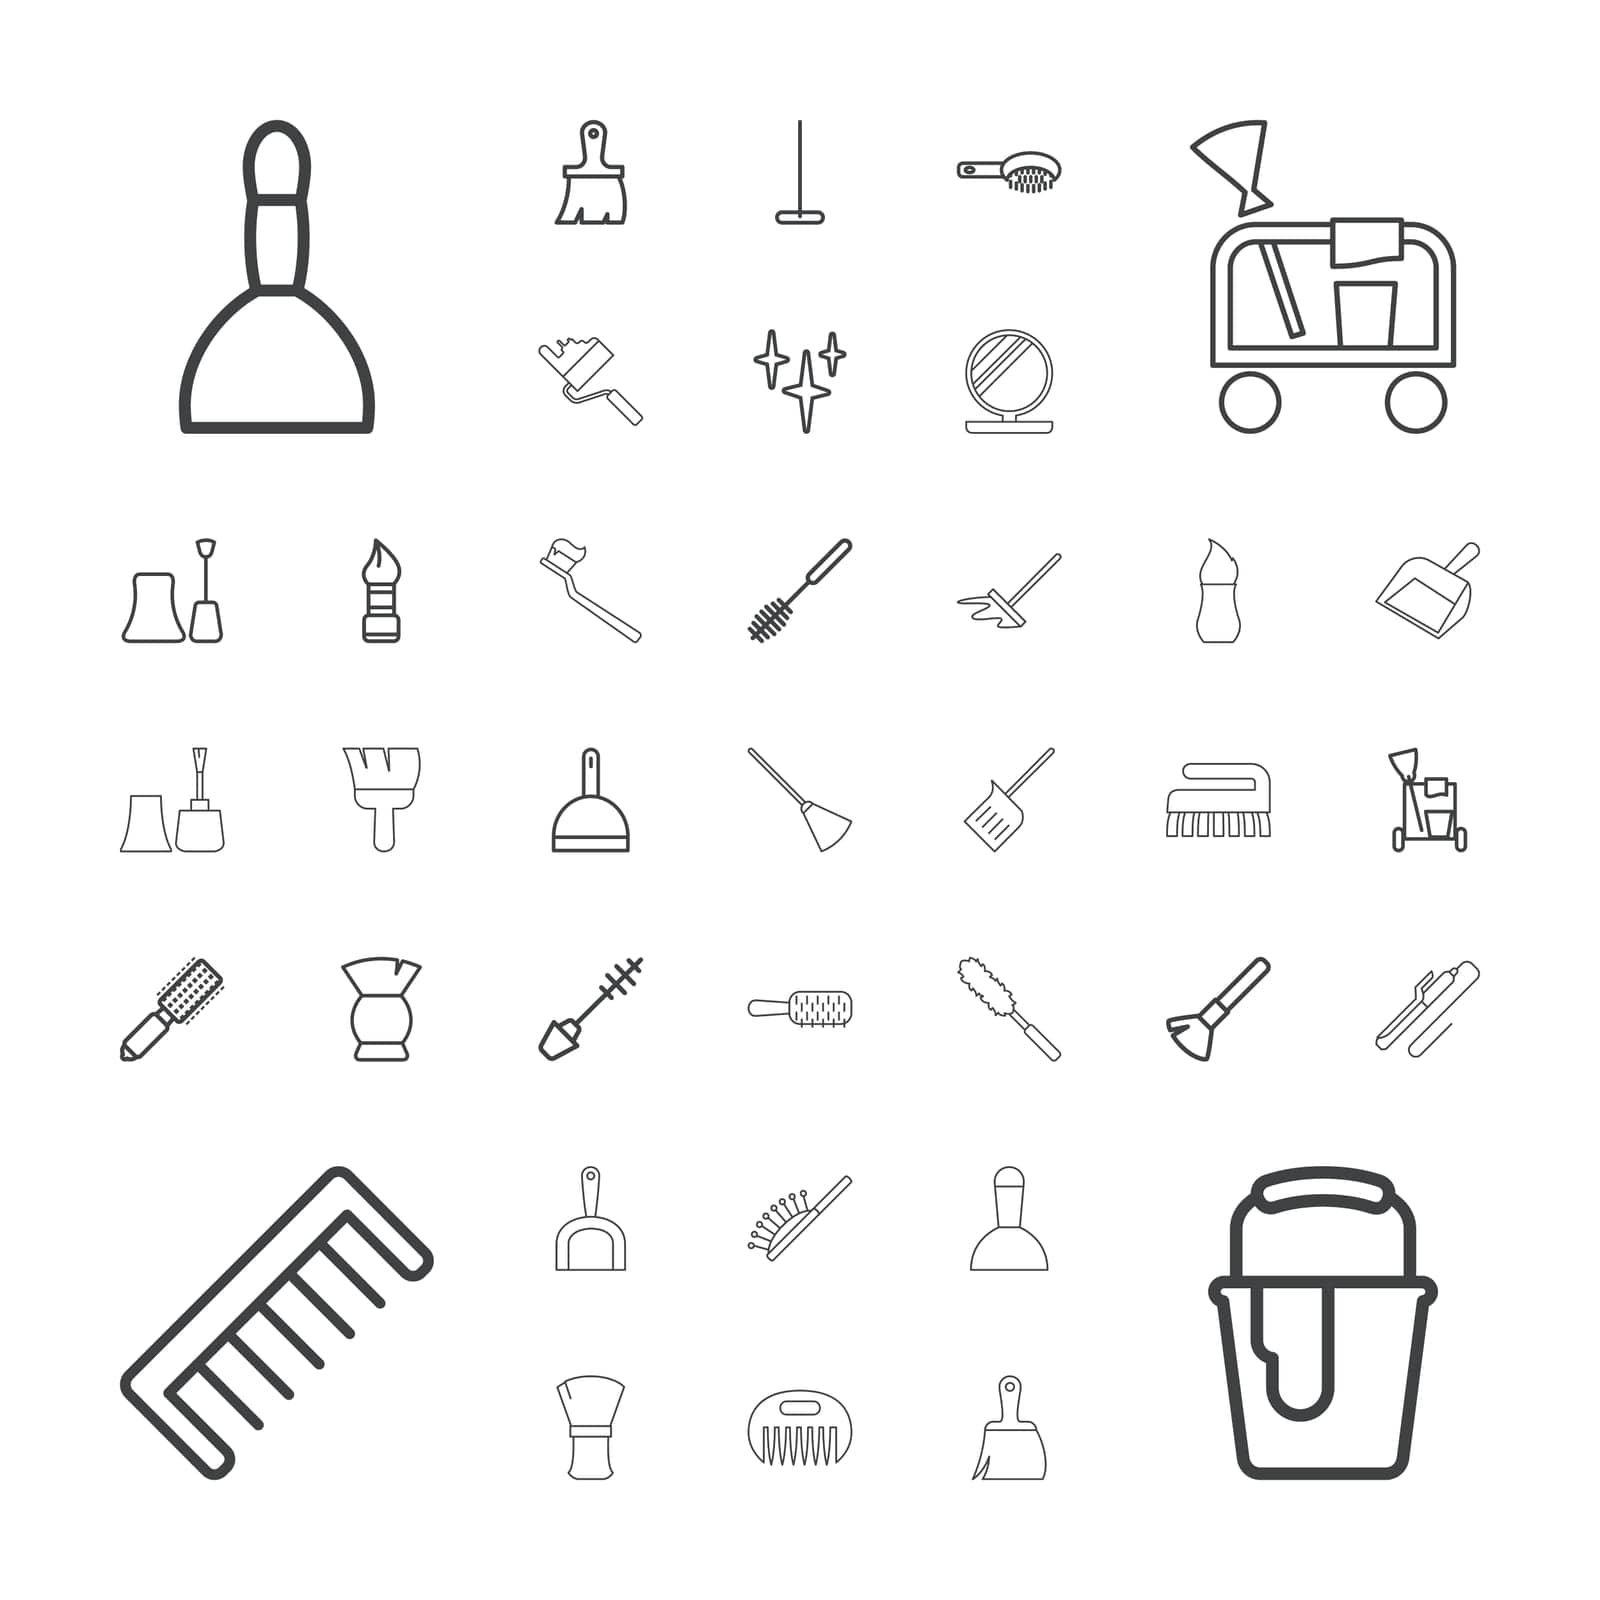 symbol,icon,isolated,paint,bag,dustpan,powder,curler,tools,mop,hair,white,design,vector,dust,tooth,brush,cleaning,set,spa,nail,broom,equipment,shaving,clean,tool,comb,bucket,toilet,illustration,polish,mascara,roller